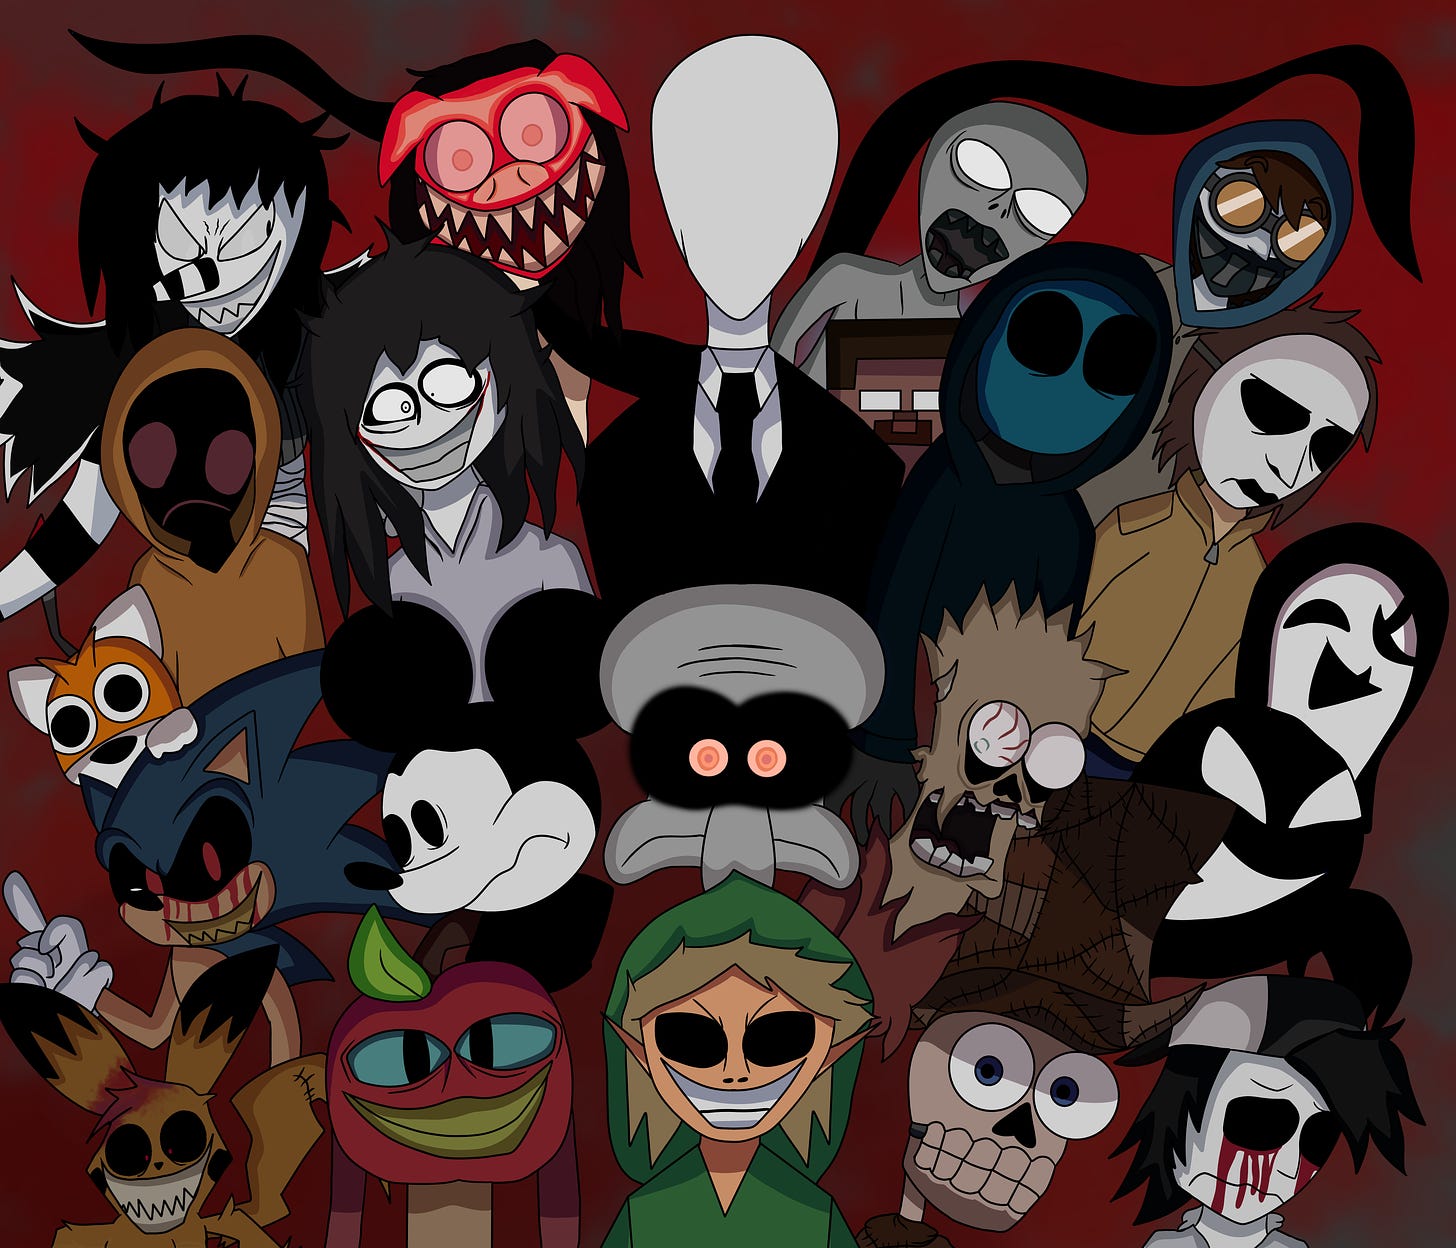 CREEPYPASTA! I tried to fit most of the iconic pastas in! :D : r/creepypasta